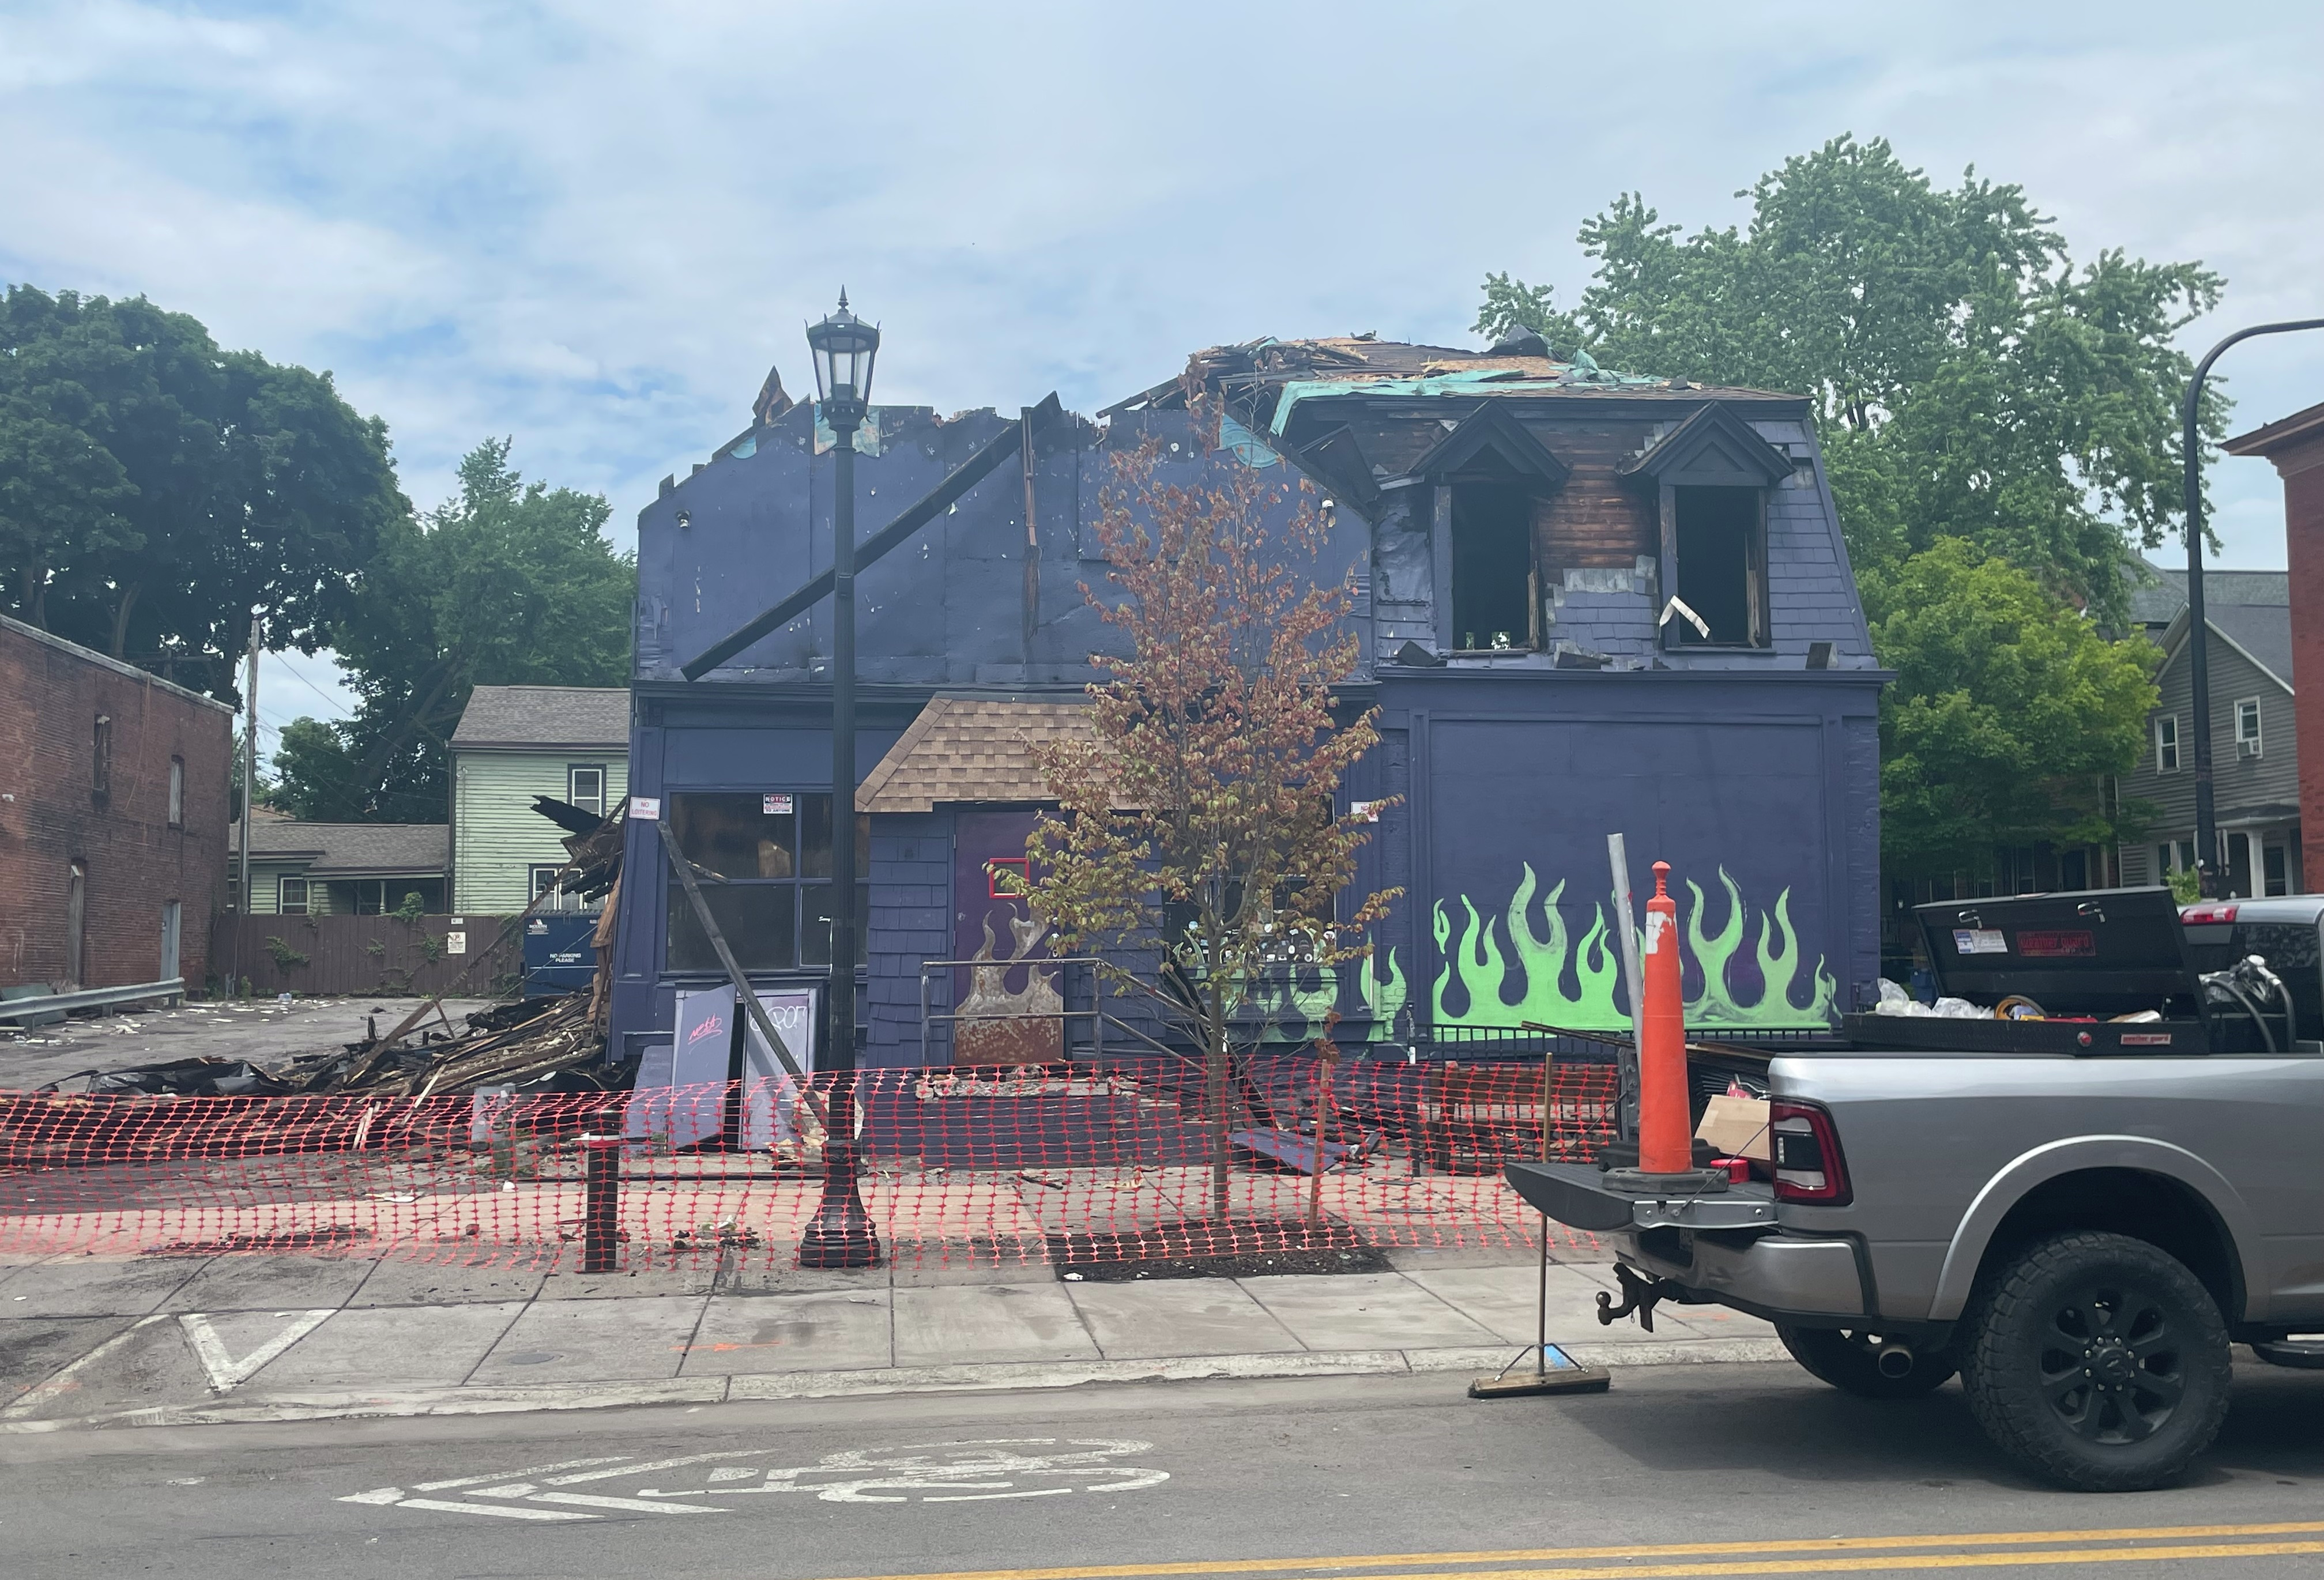 Co-manager and bartender at The Old Pink, Nick Stilb on the devastating loss of the iconic bar in Buffalo's Allentown neighborhood